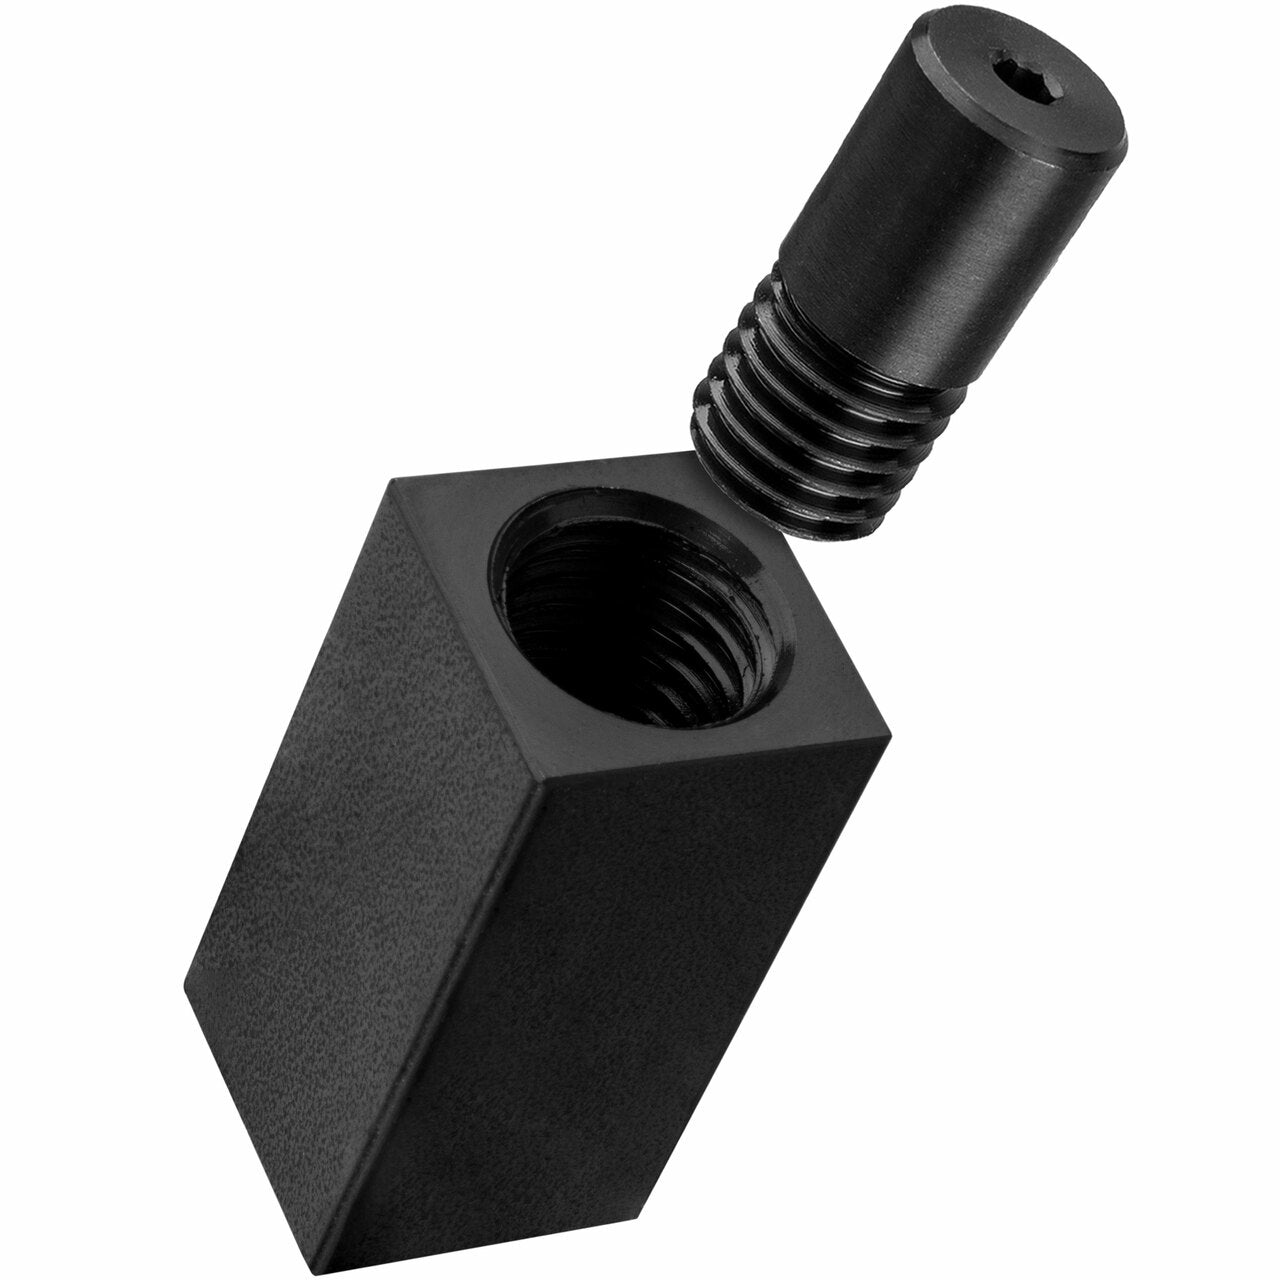 Post Pin, 1" x 2" - 3/4" System (4 Pack)